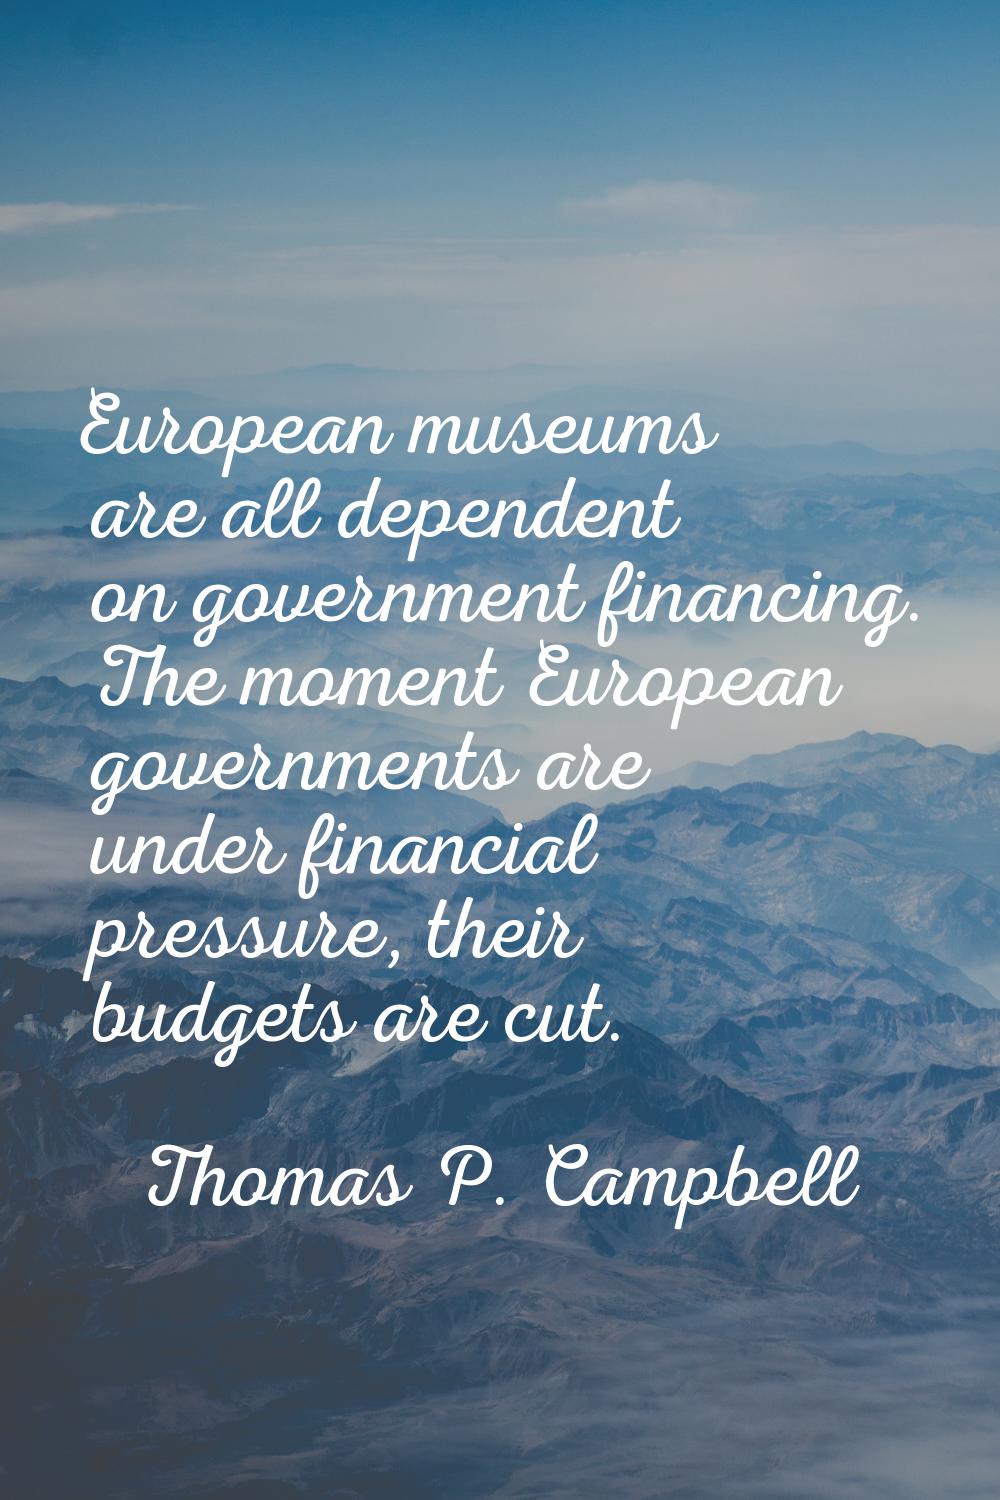 European museums are all dependent on government financing. The moment European governments are und